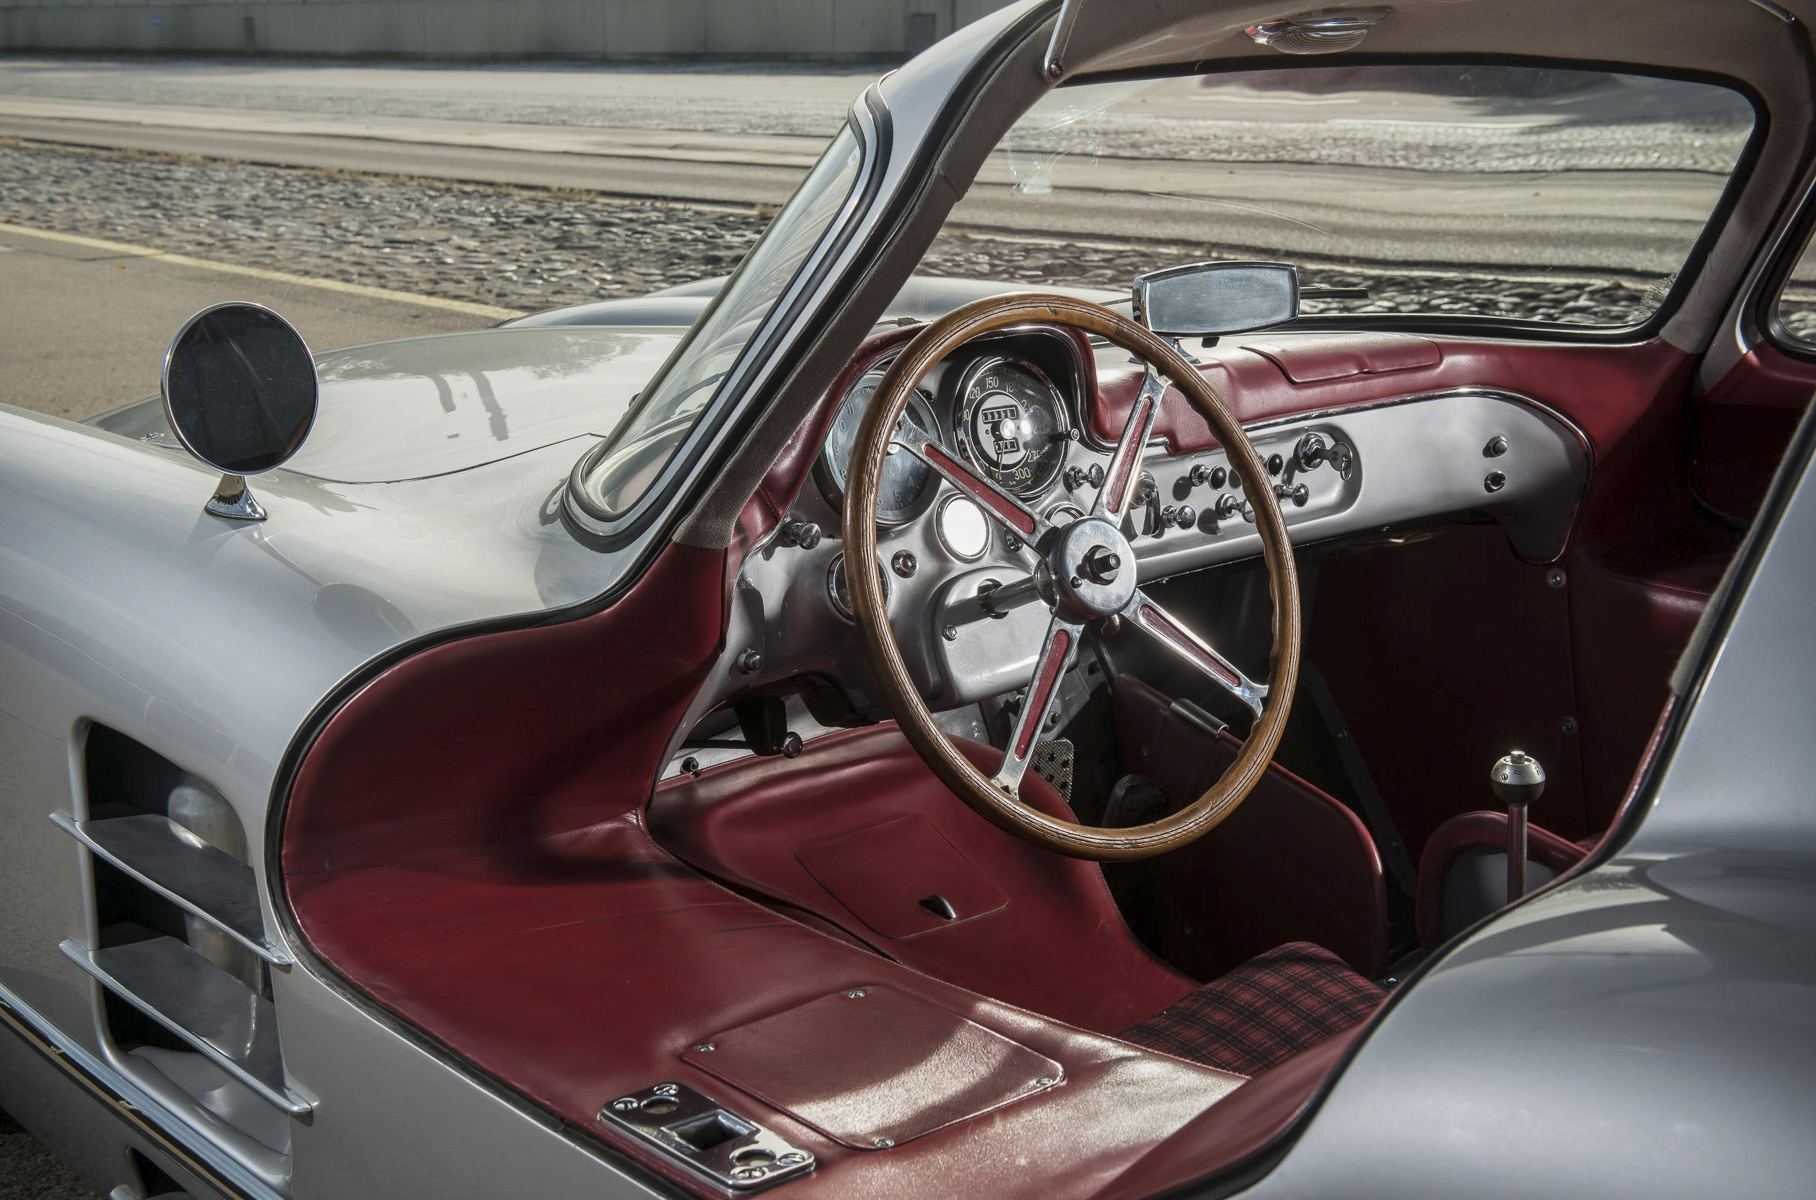 Foto: Hagerty Insider